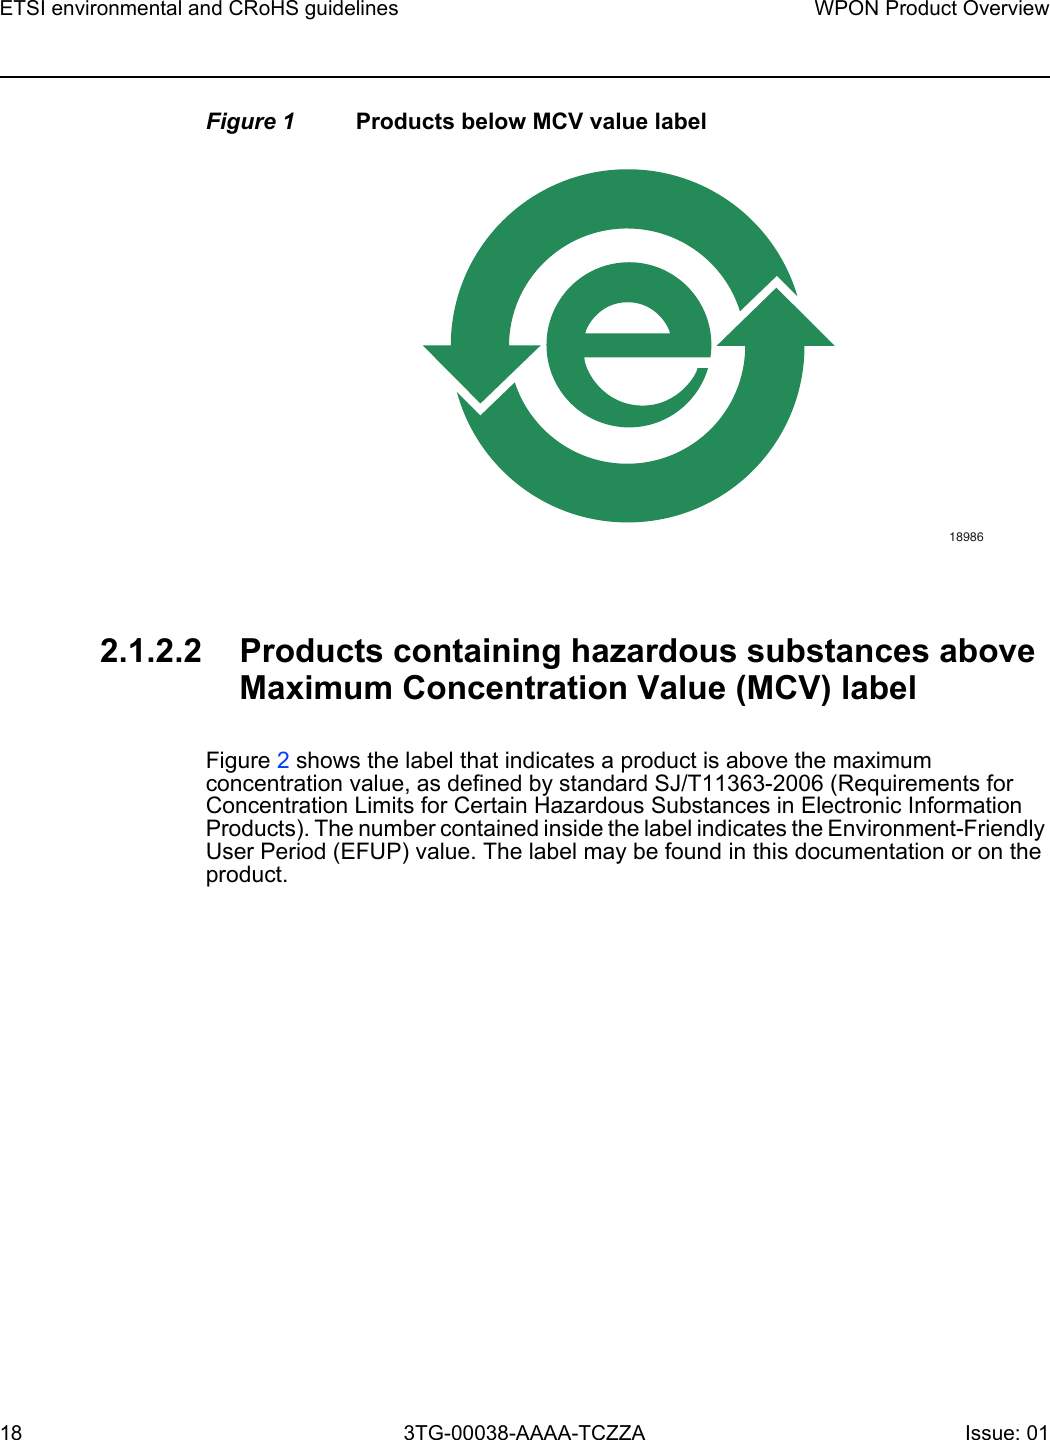 ETSI environmental and CRoHS guidelines18WPON Product Overview3TG-00038-AAAA-TCZZA Issue: 01 Figure 1 Products below MCV value label2.1.2.2 Products containing hazardous substances above Maximum Concentration Value (MCV) labelFigure 2 shows the label that indicates a product is above the maximum concentration value, as defined by standard SJ/T11363-2006 (Requirements for Concentration Limits for Certain Hazardous Substances in Electronic Information Products). The number contained inside the label indicates the Environment-Friendly User Period (EFUP) value. The label may be found in this documentation or on the product.18986